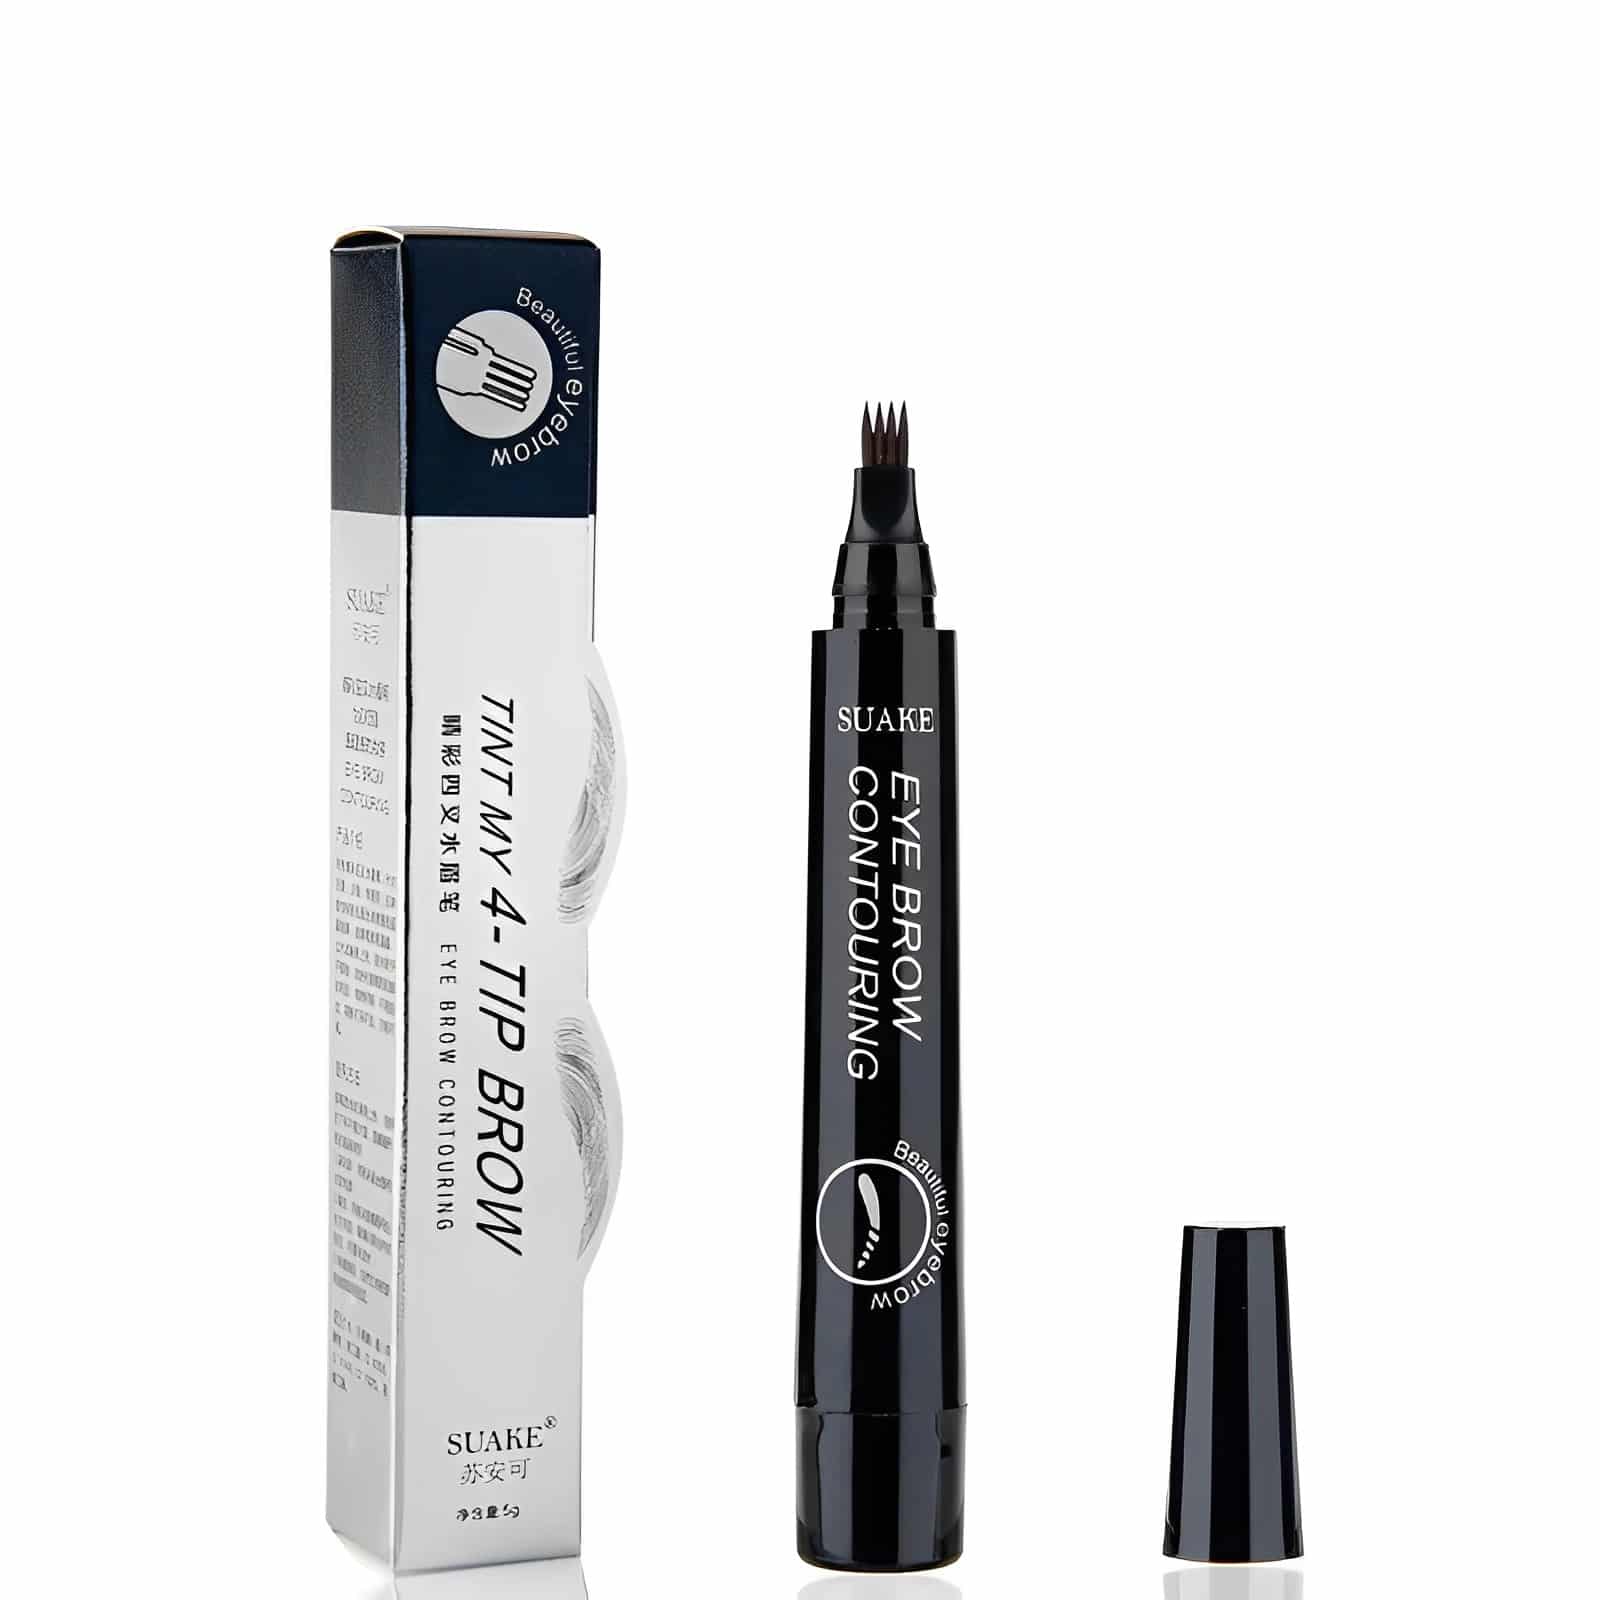 This 4 Fork 3D Waterproof Eyebrow Liquid Ink Pen and Eye Pencil has Micro-fork tips which gives a thick natural brow line up with a lasting liquid.